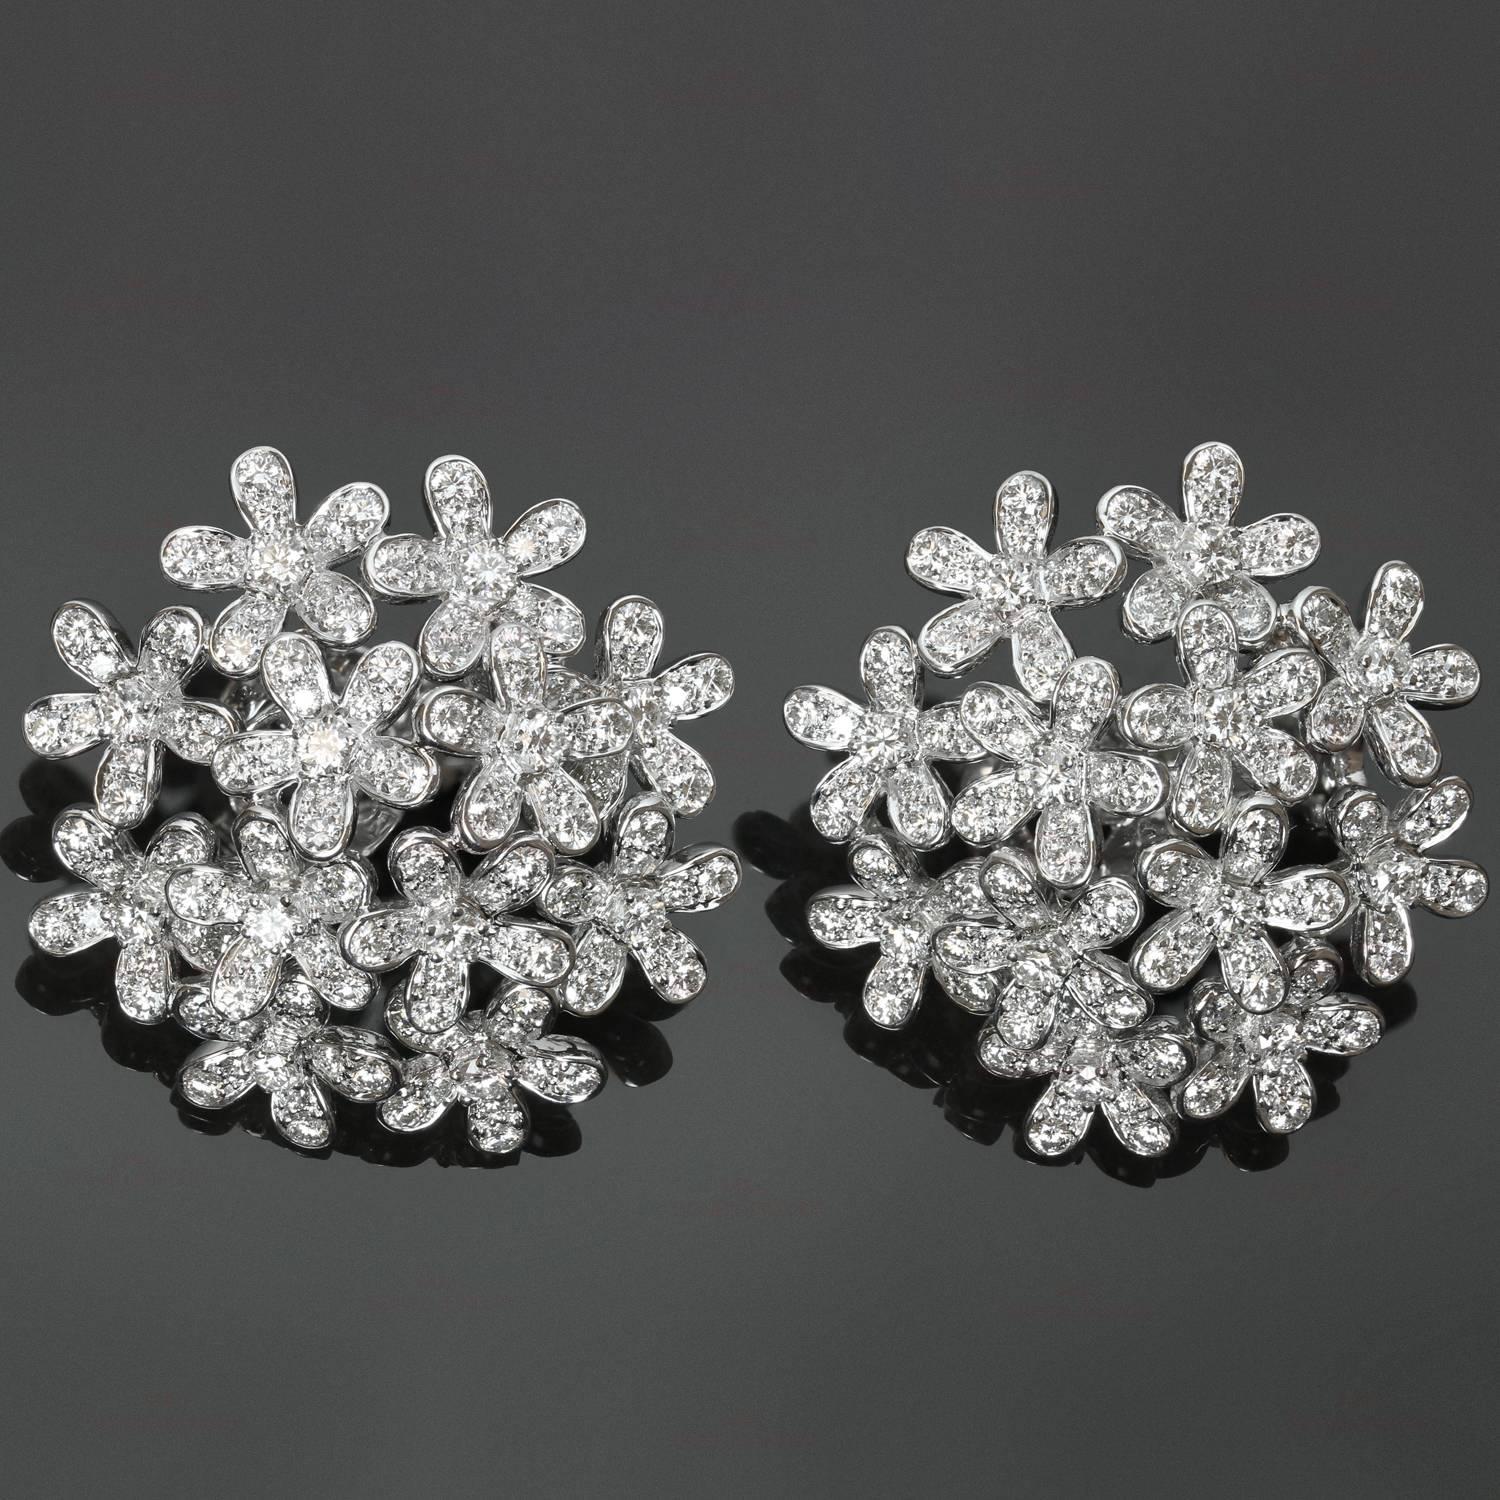 These stunning hand-made Van Cleef & Arpels earrings from the exquisite Socrate collection feature a delicate floral motif crafted in 18k white gold and set with approximately 265 brilliant-cut round diamonds of an estimated 5.45 carats. These